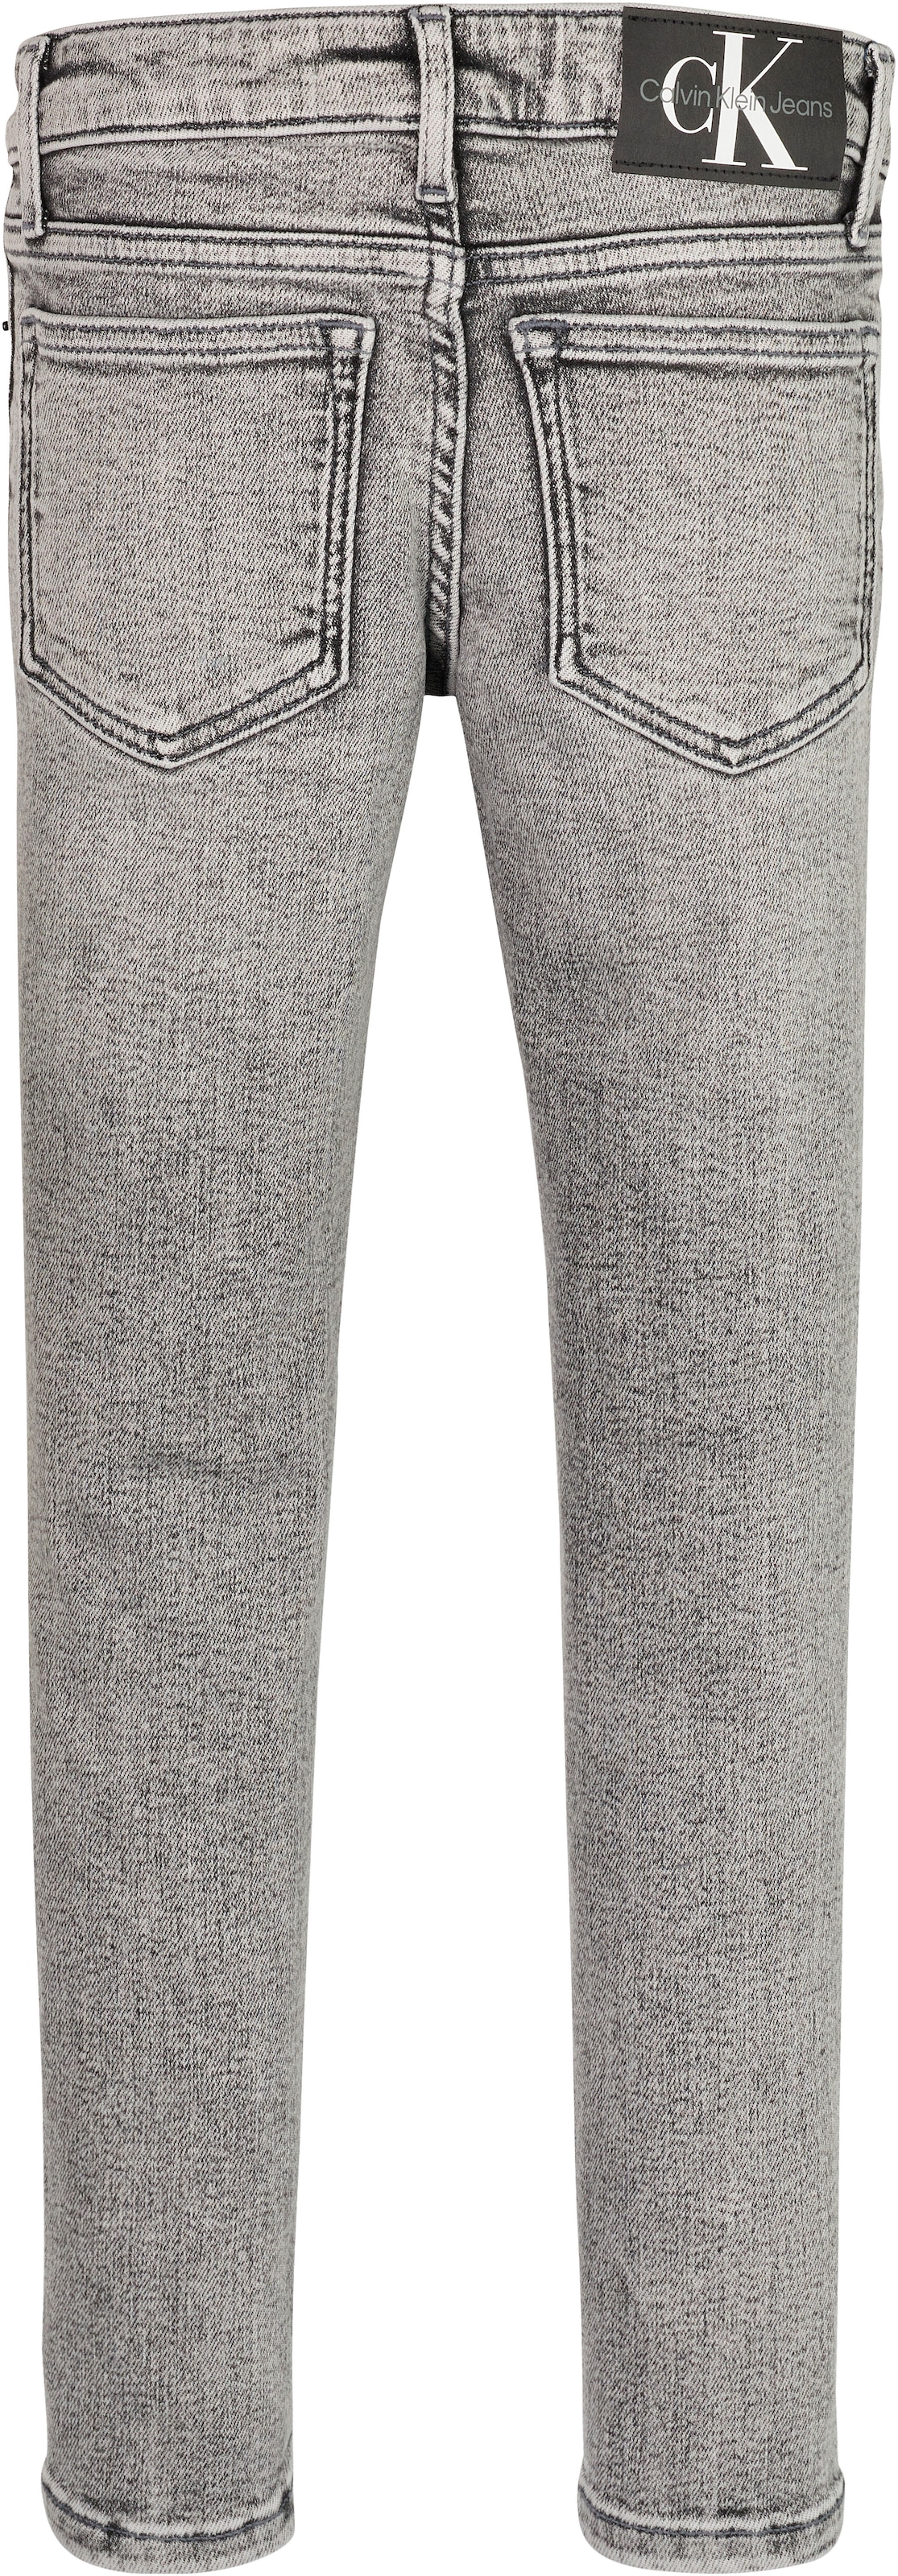 Calvin Klein MR ♕ Stretch-Jeans GREY« WASHED »SKINNY Jeans bei